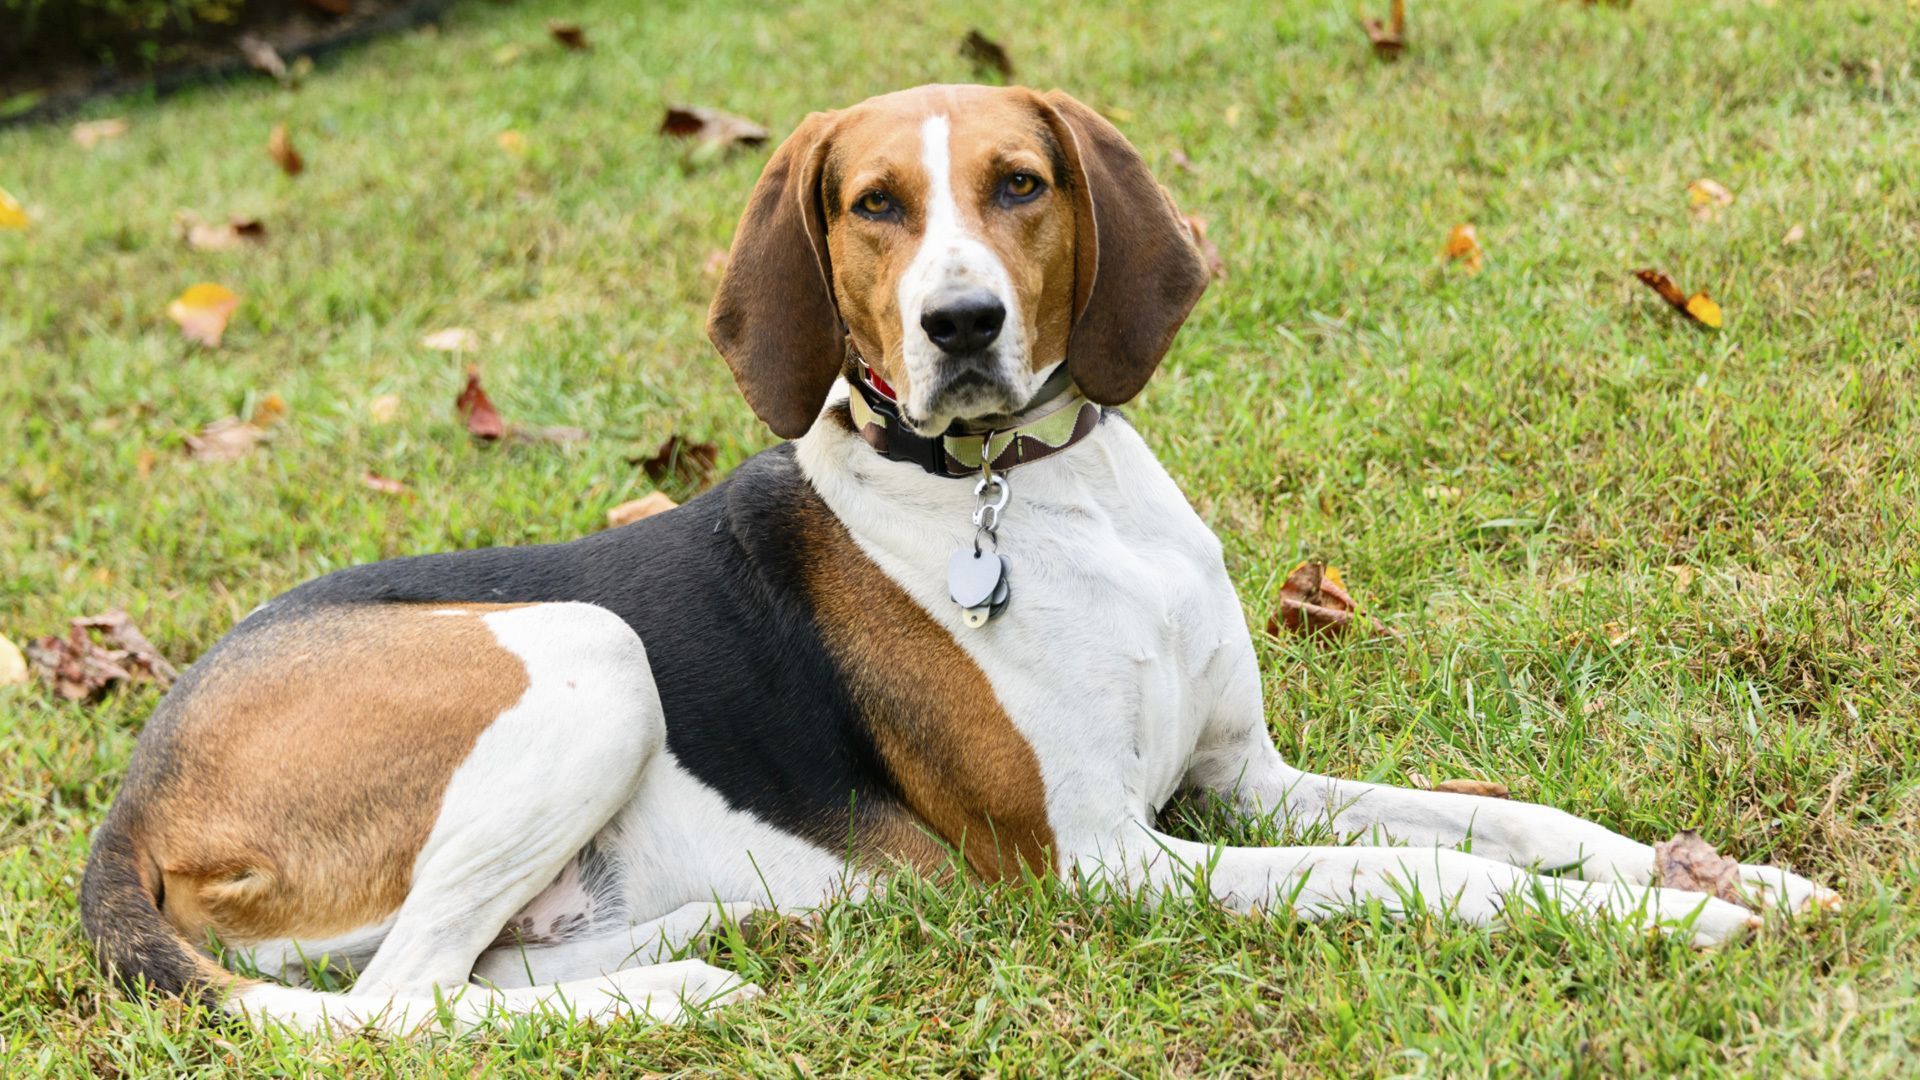 American English Coonhound, Photo, Characteristics, Names. Treeing walker coonhound, Walker coonhound, Coonhound